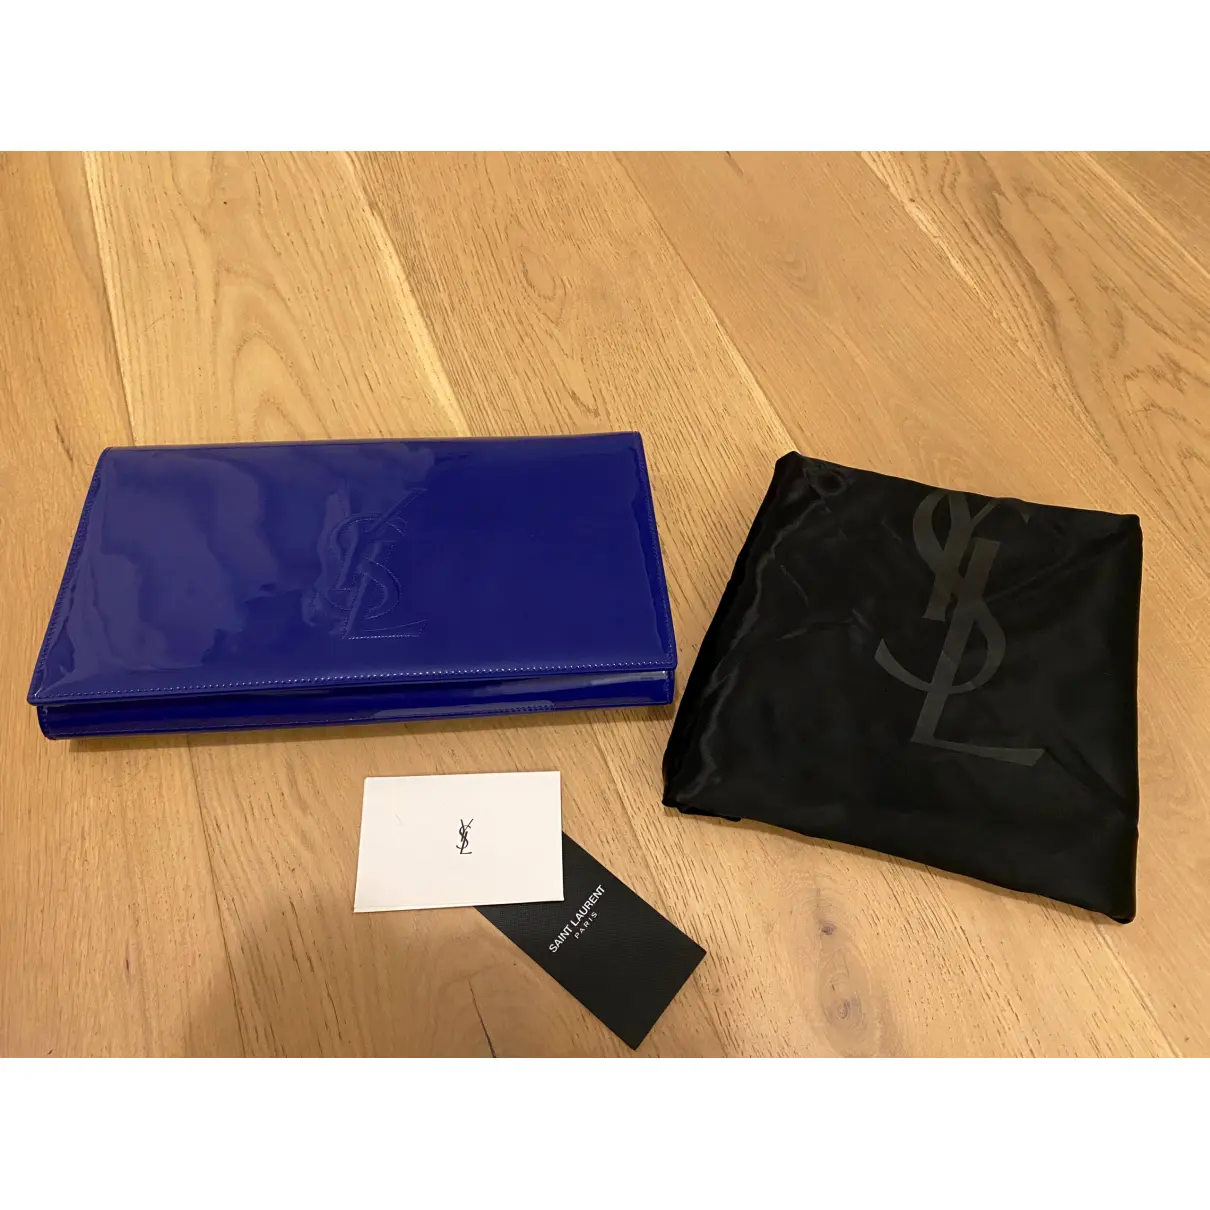 Chyc patent leather clutch bag Yves Saint Laurent